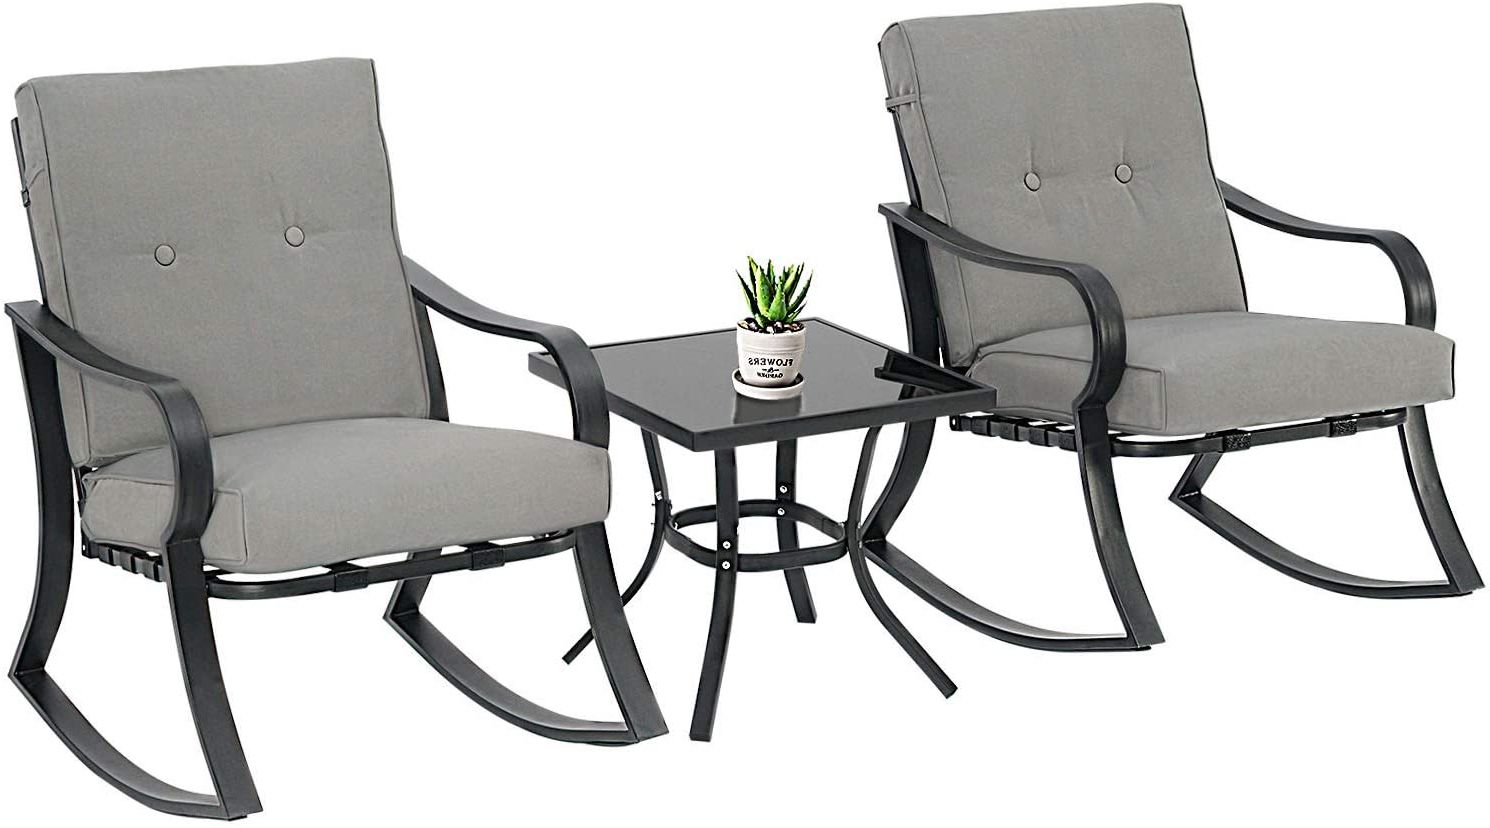 Black And Gray Outdoor Table And Chair Sets In Current 3 Piece Outdoor Rocking Chairs Bistro Set, Black Steel Patio Furniture (View 15 of 15)